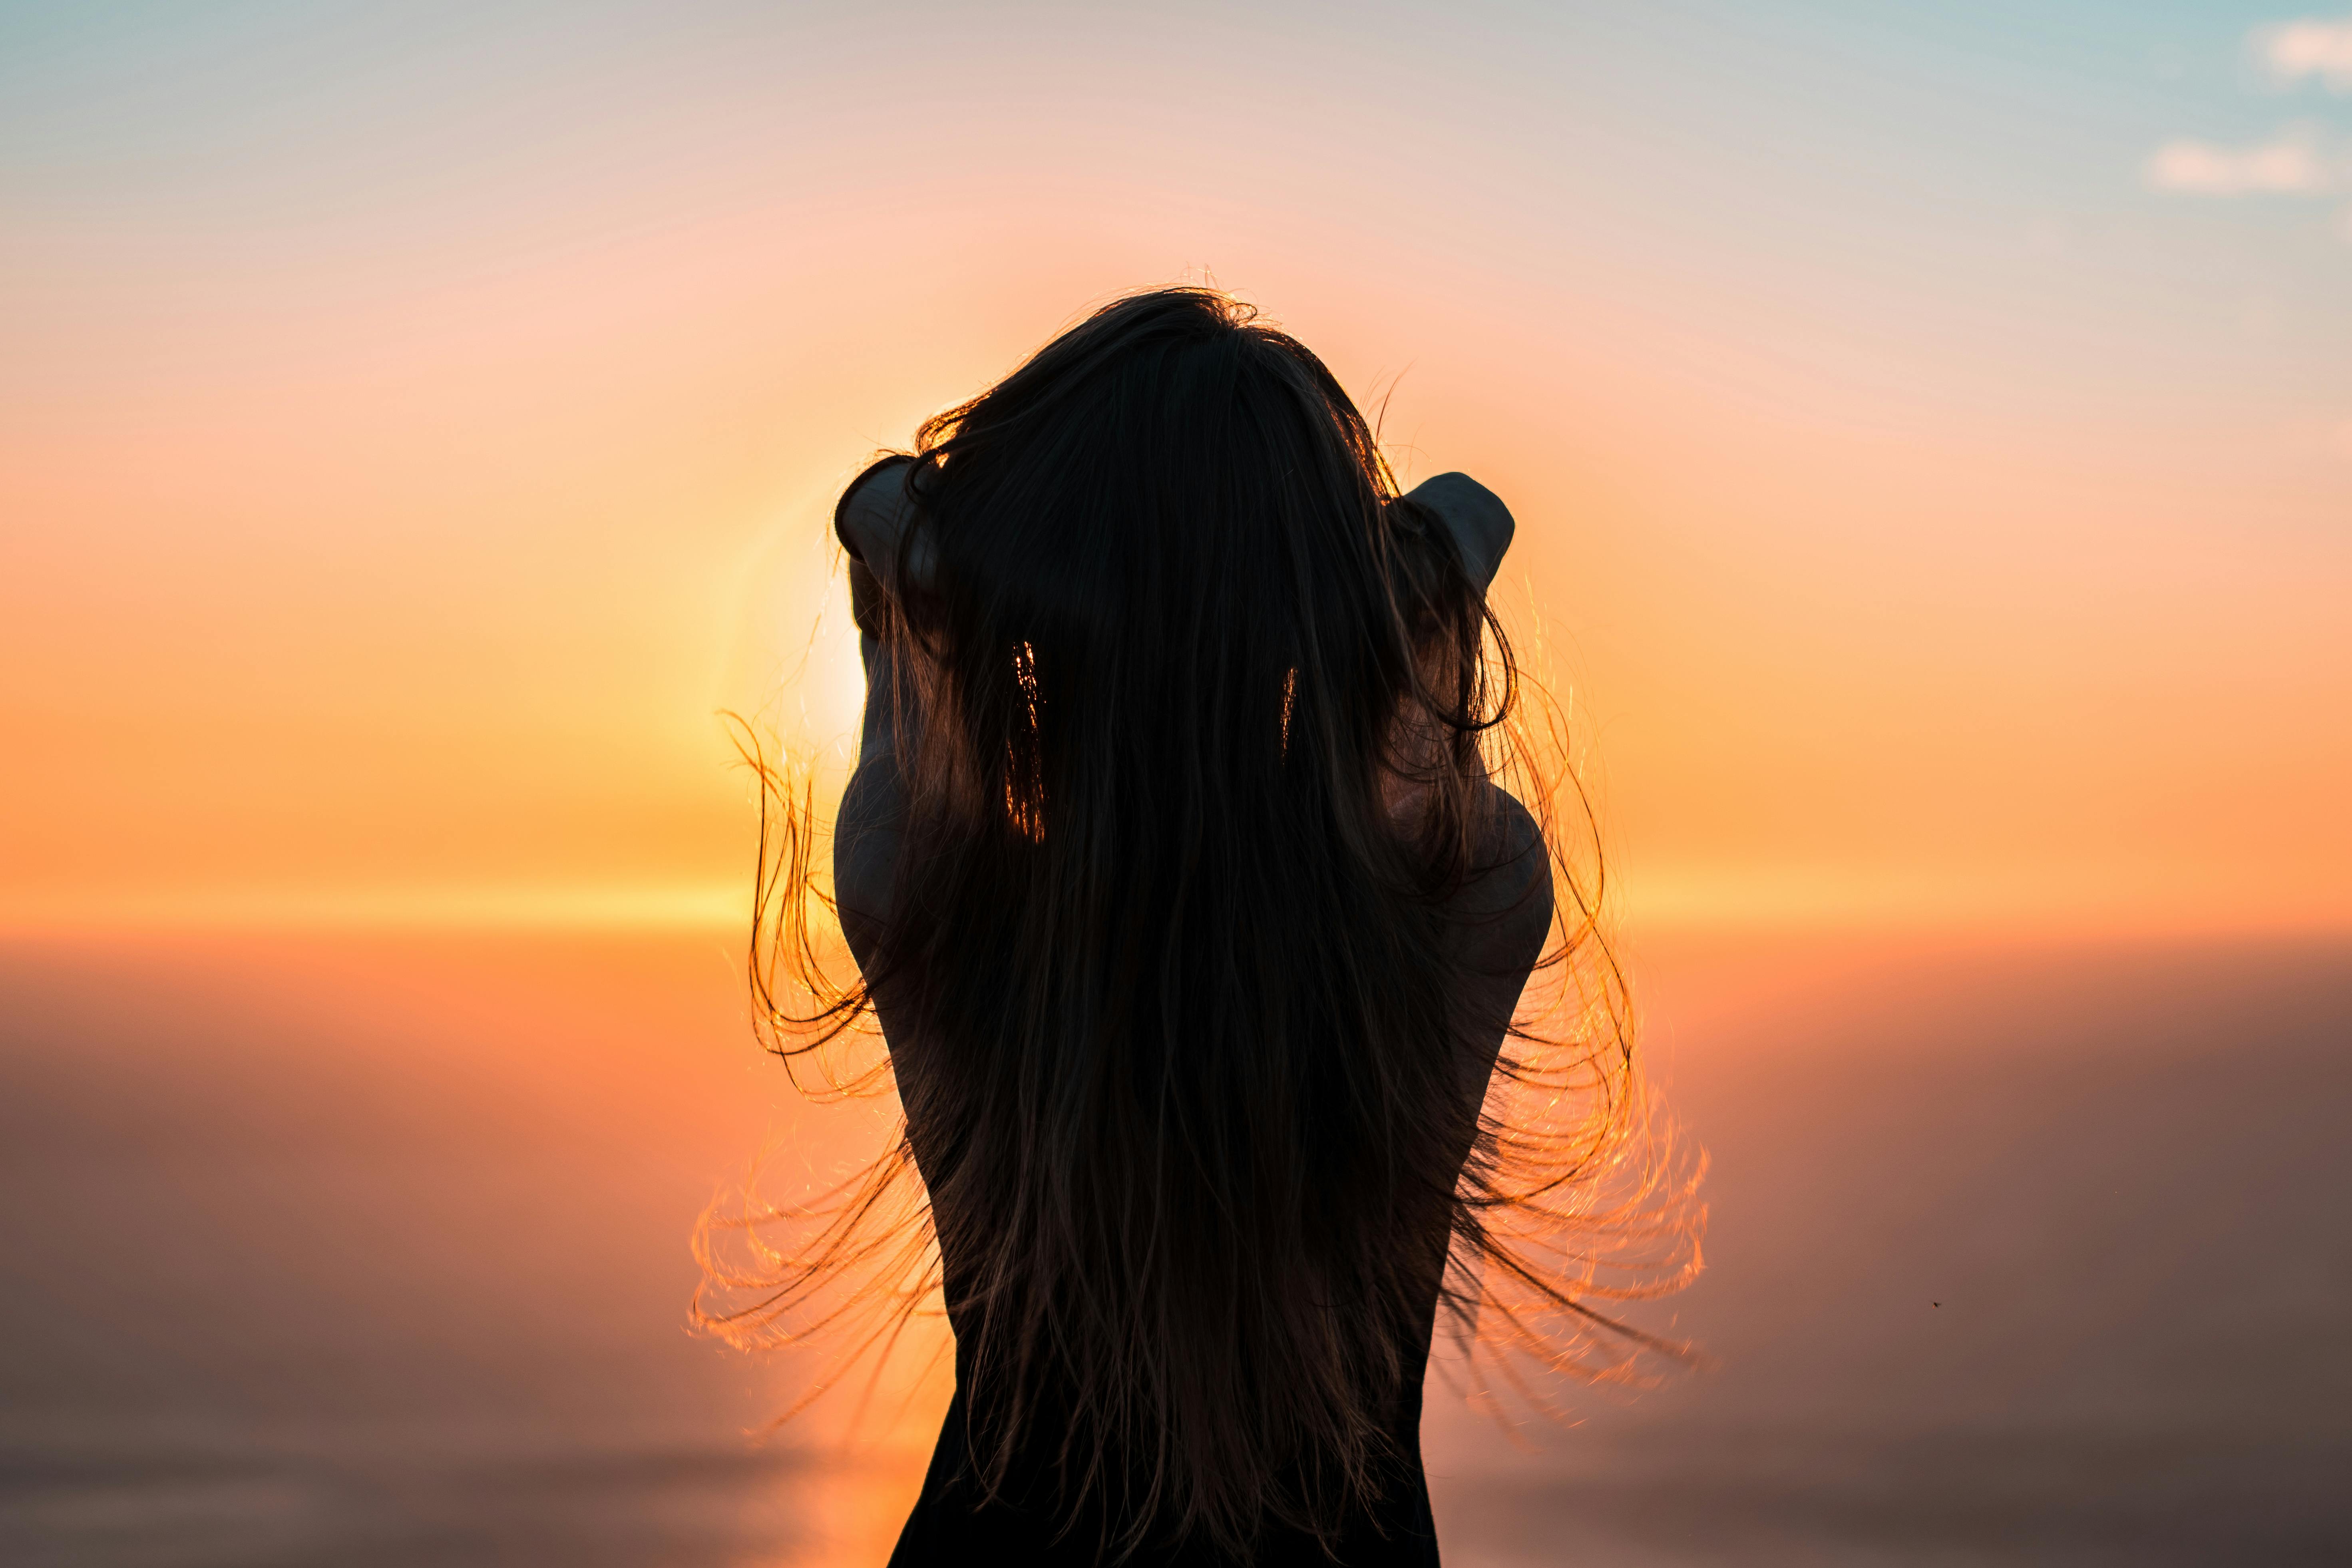 Back View Of A Woman With Long Hair · Free Stock Photo